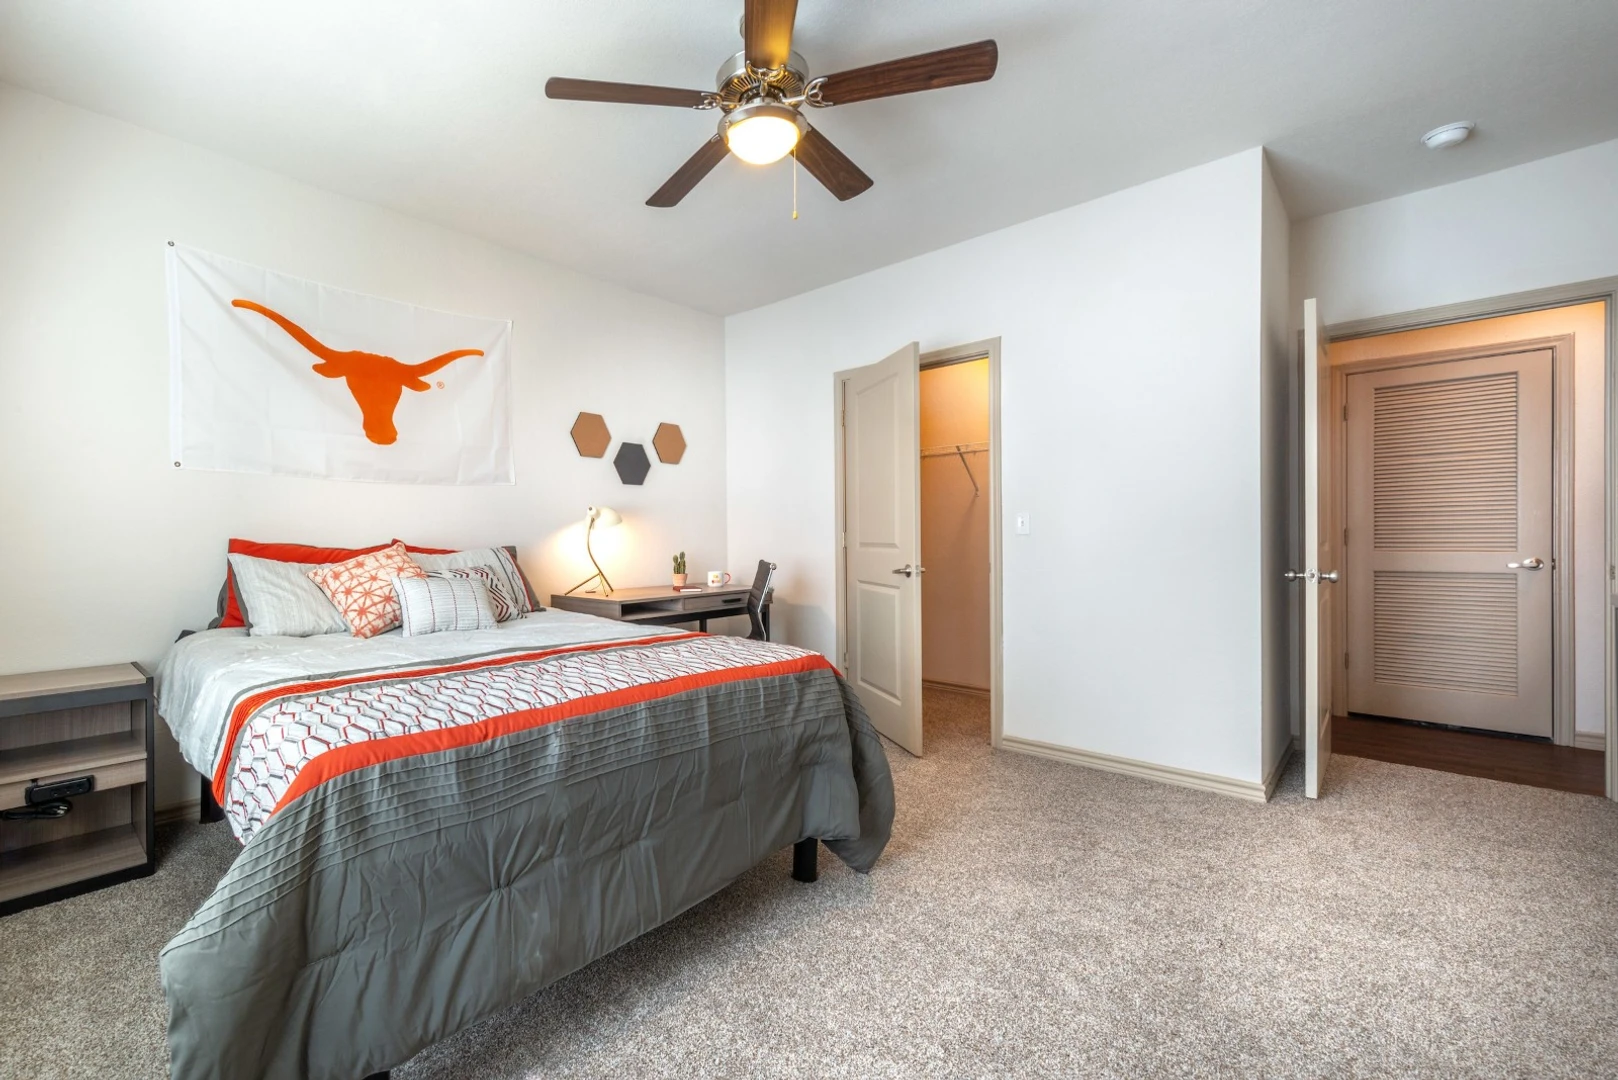 Accommodation in the centre of Austin